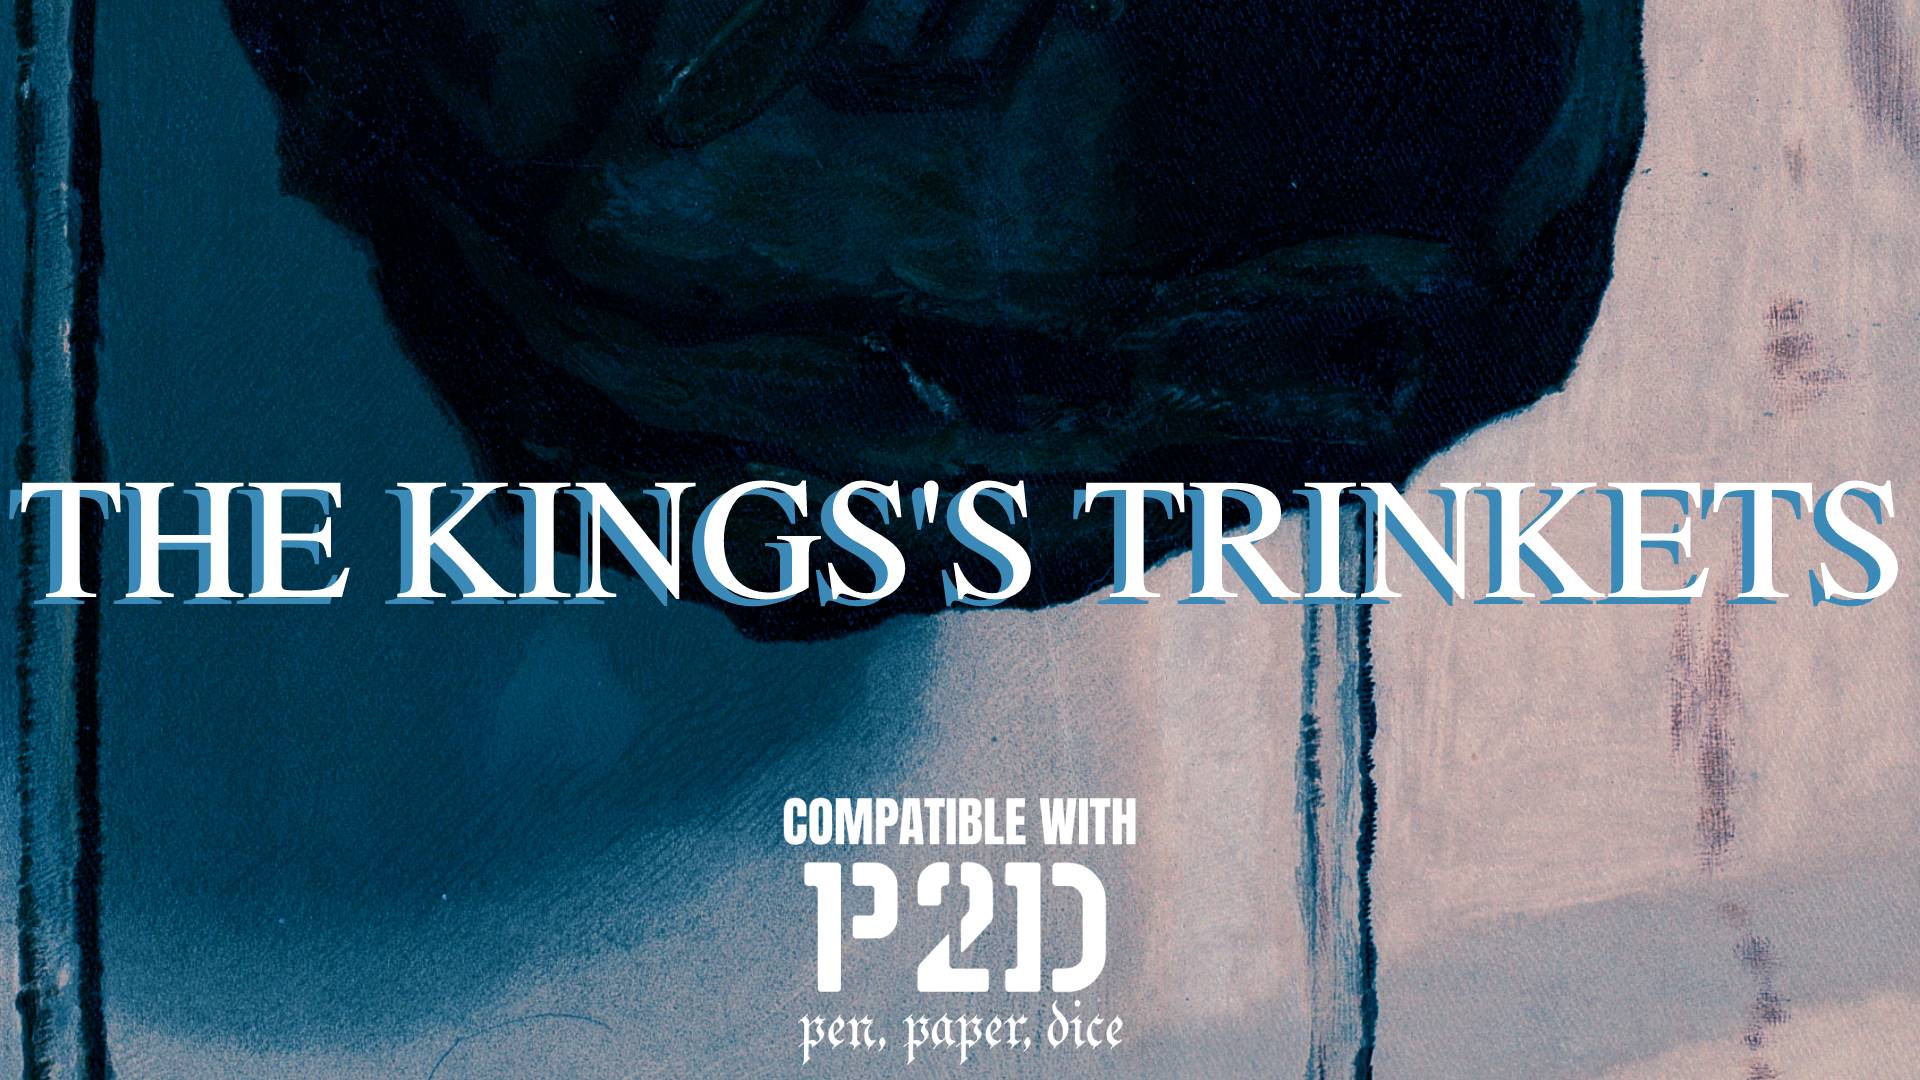 THE KING'S TRINKETS: A P2D [PEN, PAPER, DICE] ADD-ON